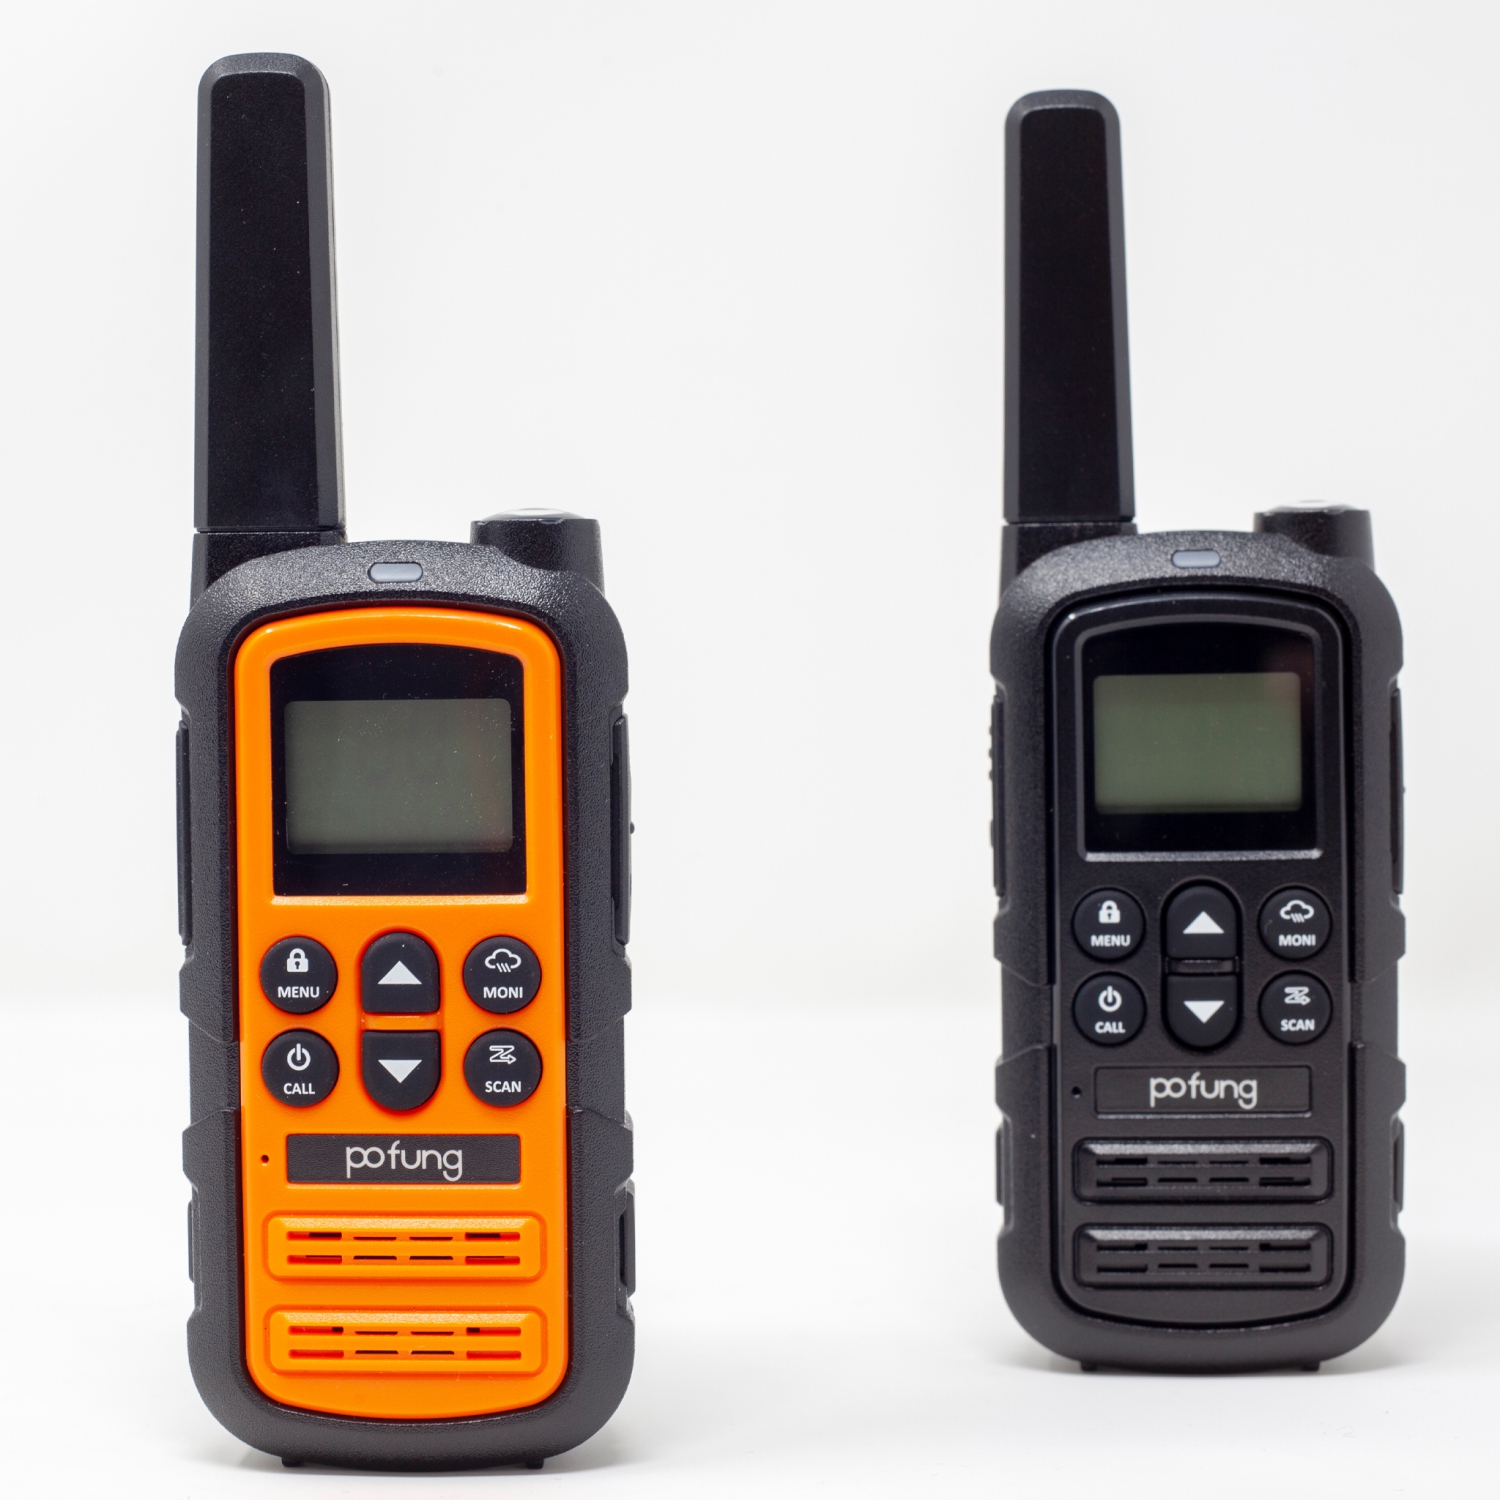 Pofung Baofeng CT23-GF1 GMRS/FRS License-Free Hand-held Radios Walkie Talkie; NOAA Channels Built-in